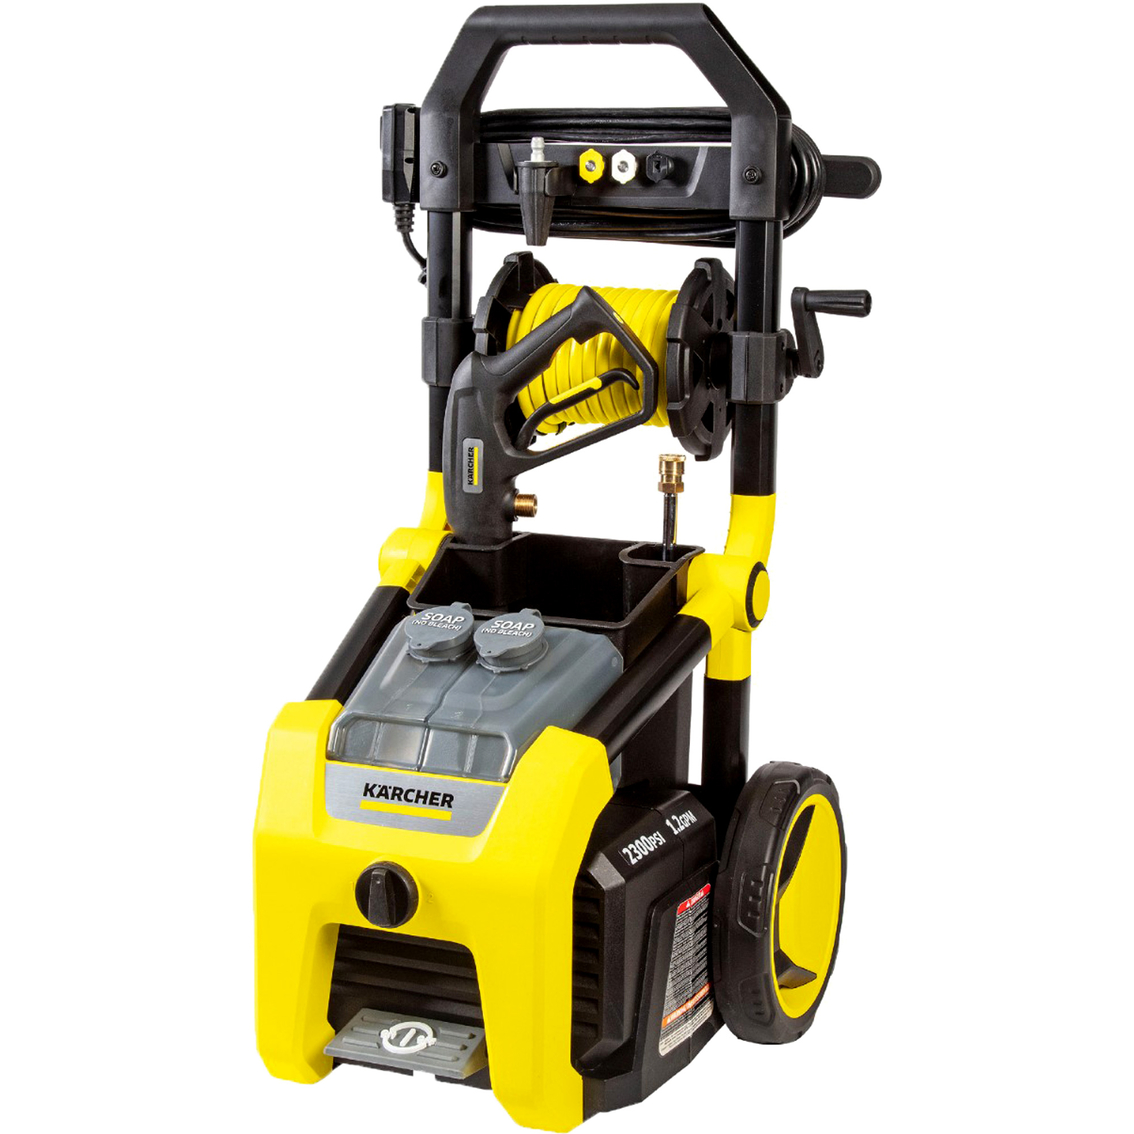 Karcher K2300PS 2300 PSI 1.2 GPM Electric Power Pressure Washer with Nozzles - Image 1 of 10